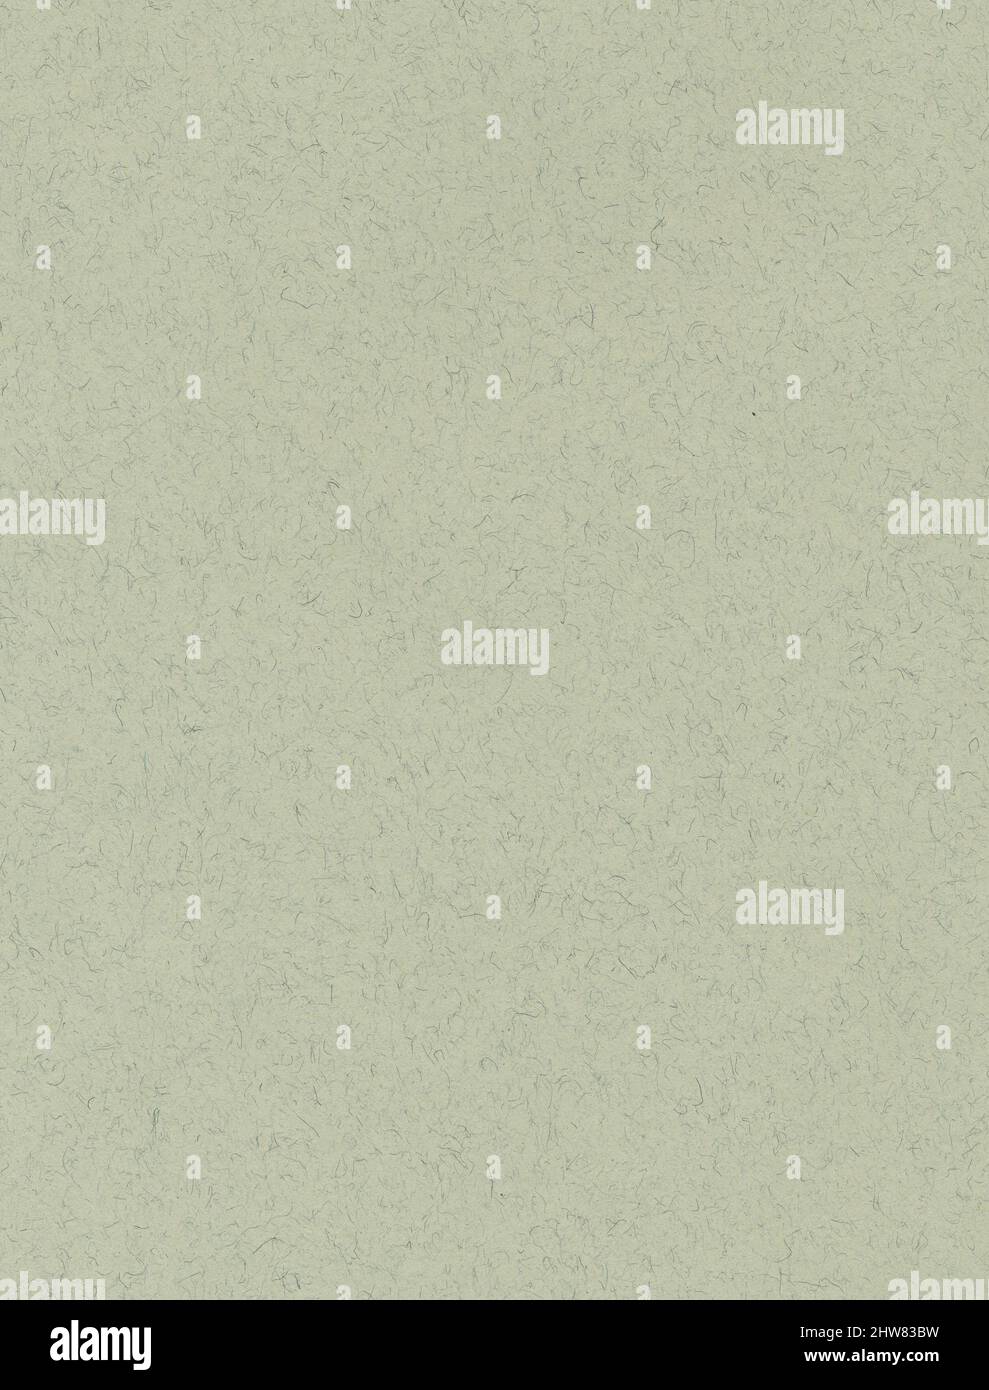 Gray paper background with pattern Stock Photo - Alamy